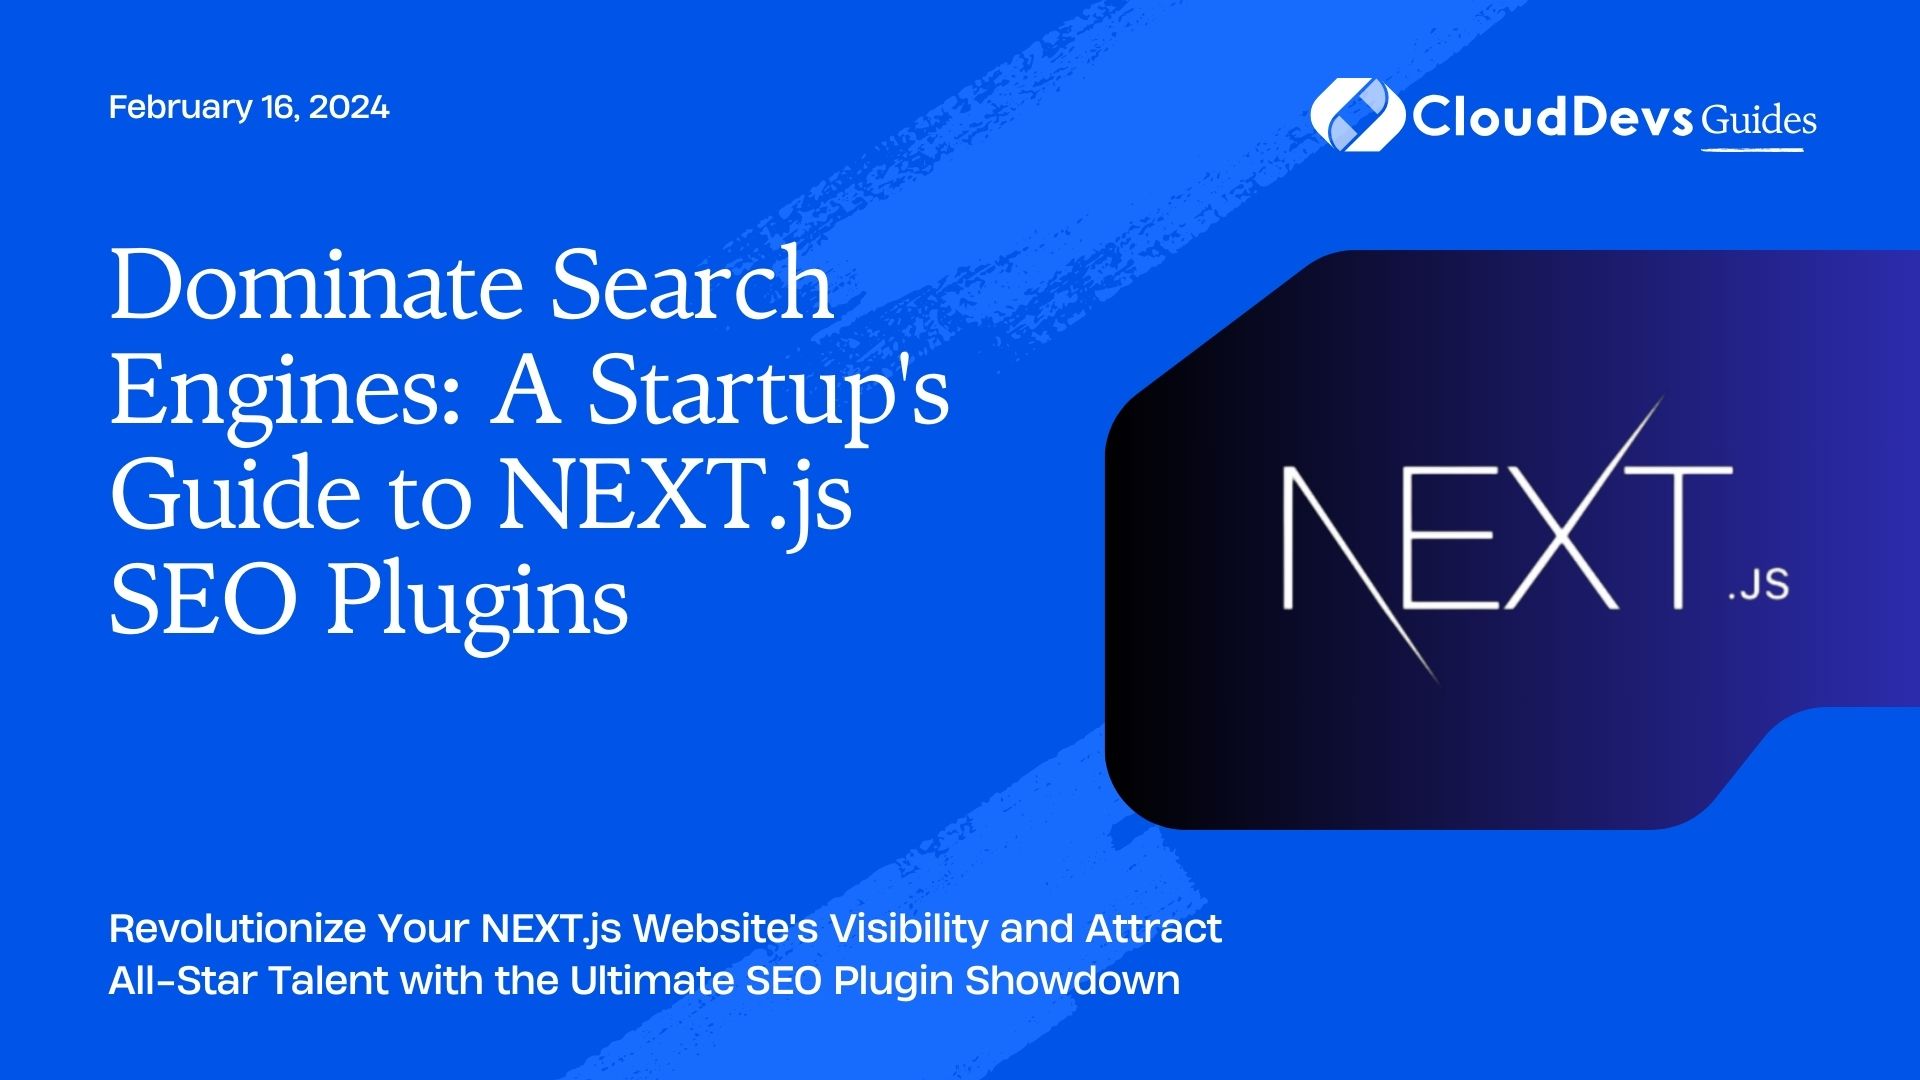 Dominate Search Engines: A Startup's Guide to NEXT.js SEO Plugins